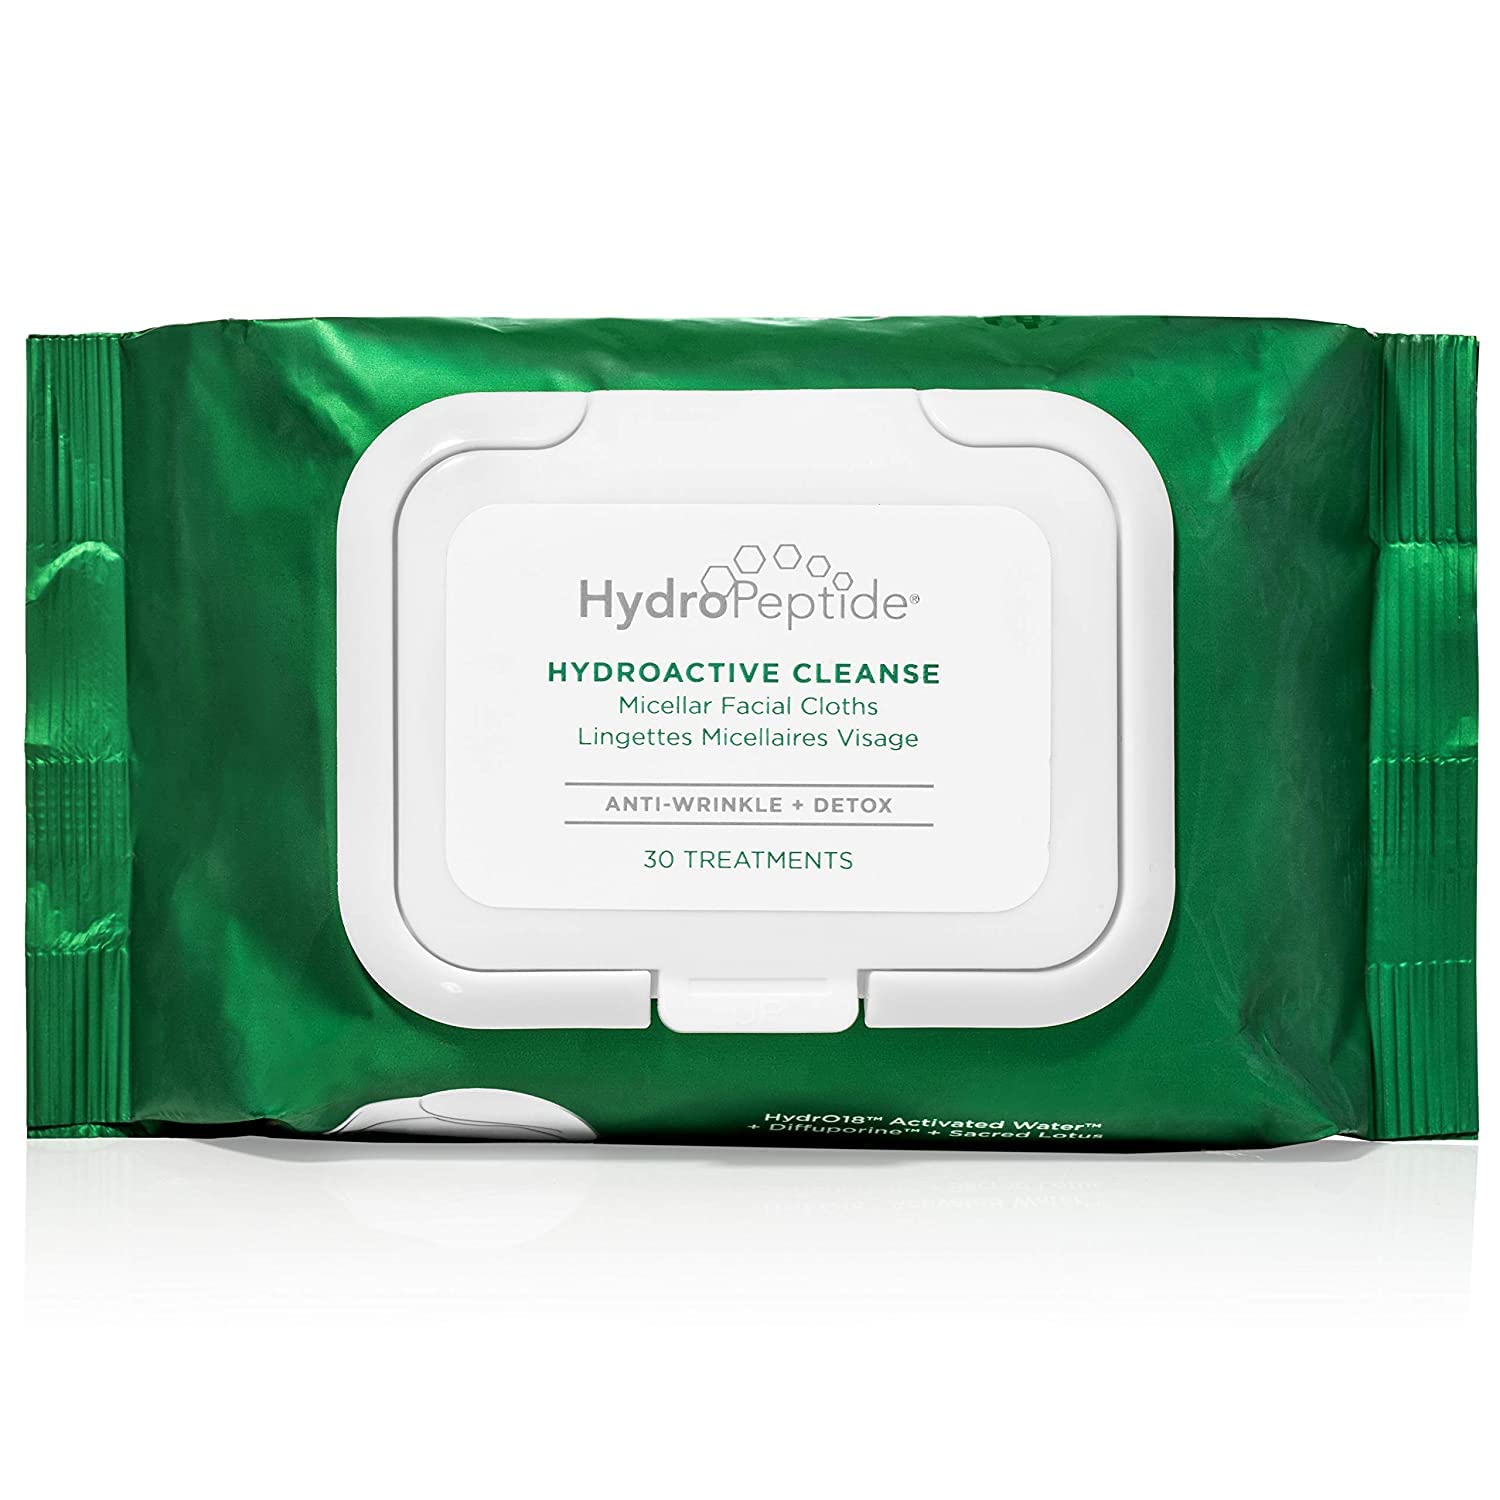 HydroPeptide HydroActive Cleanse Micellar Facial Cloths, Gently Cleanses Skin, Hydrating and Nourishing, 30 Count (Pack of 1)